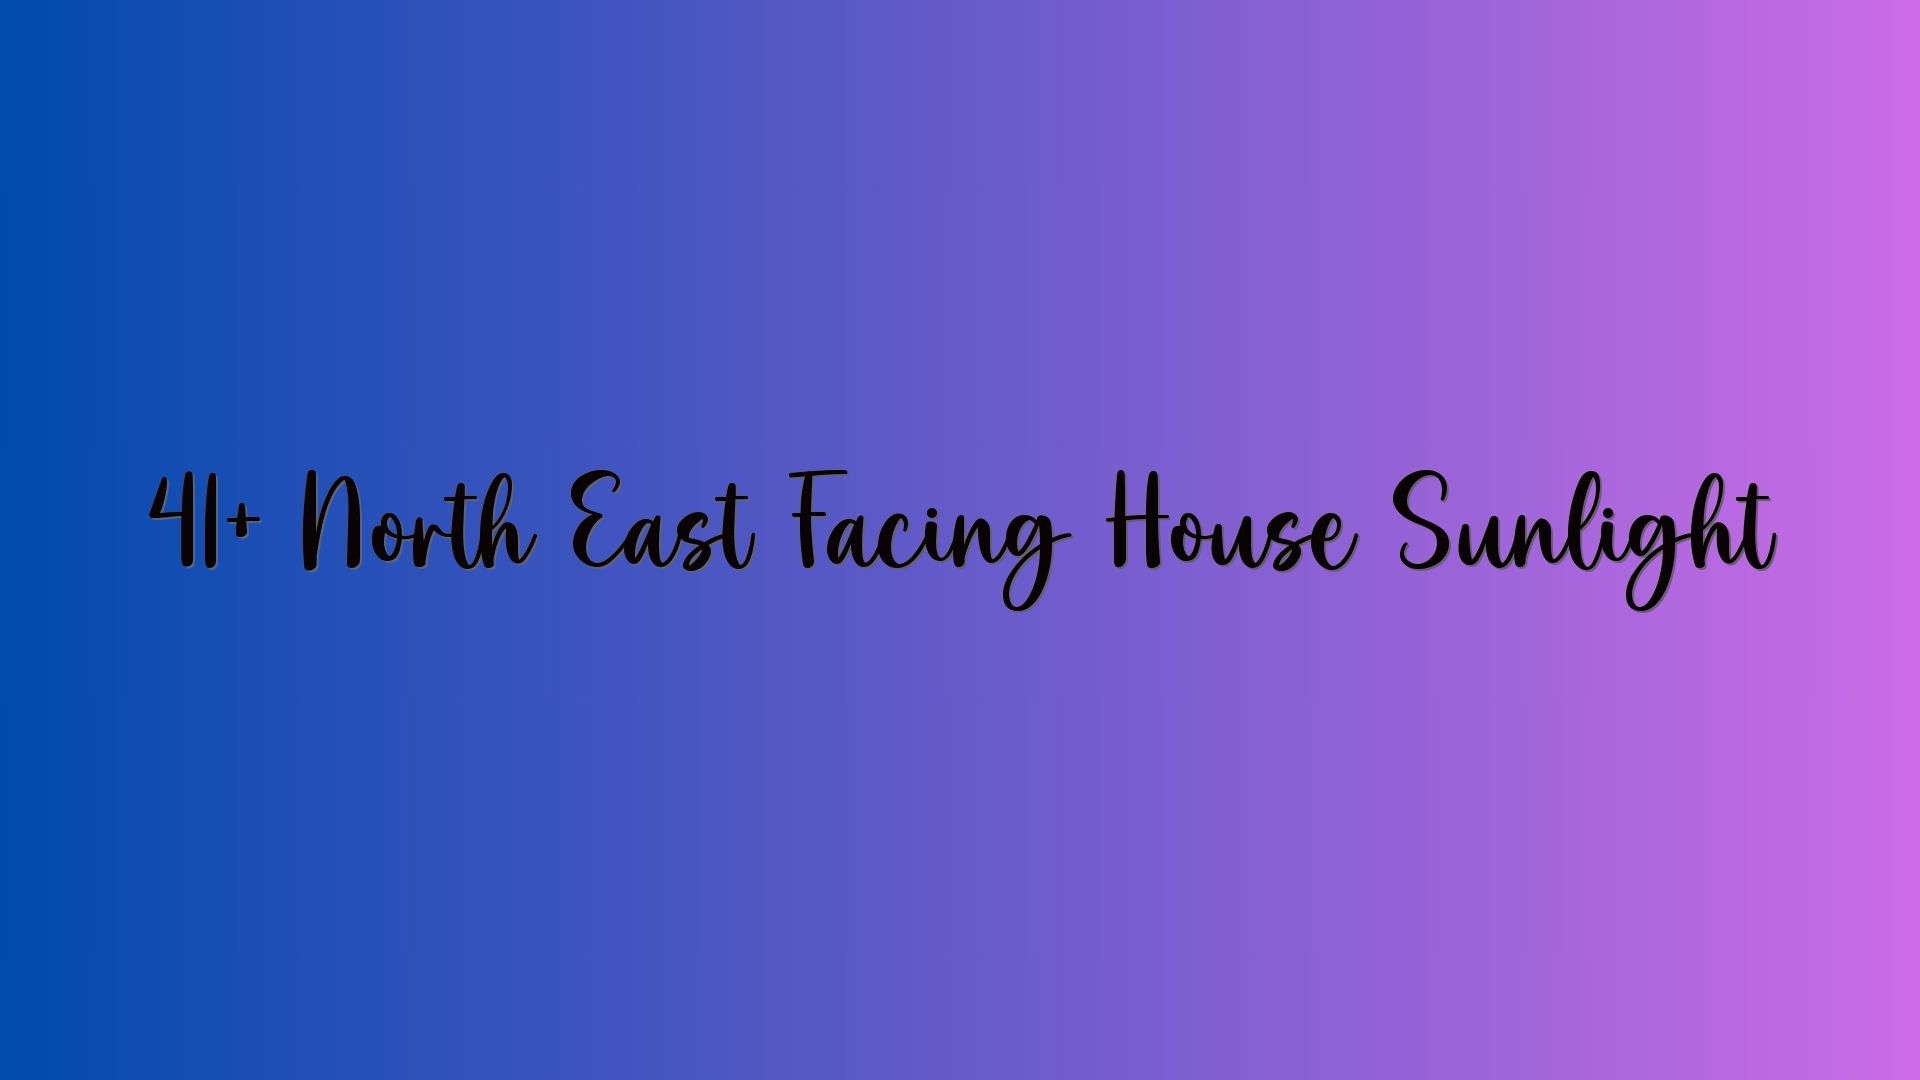 41+ North East Facing House Sunlight